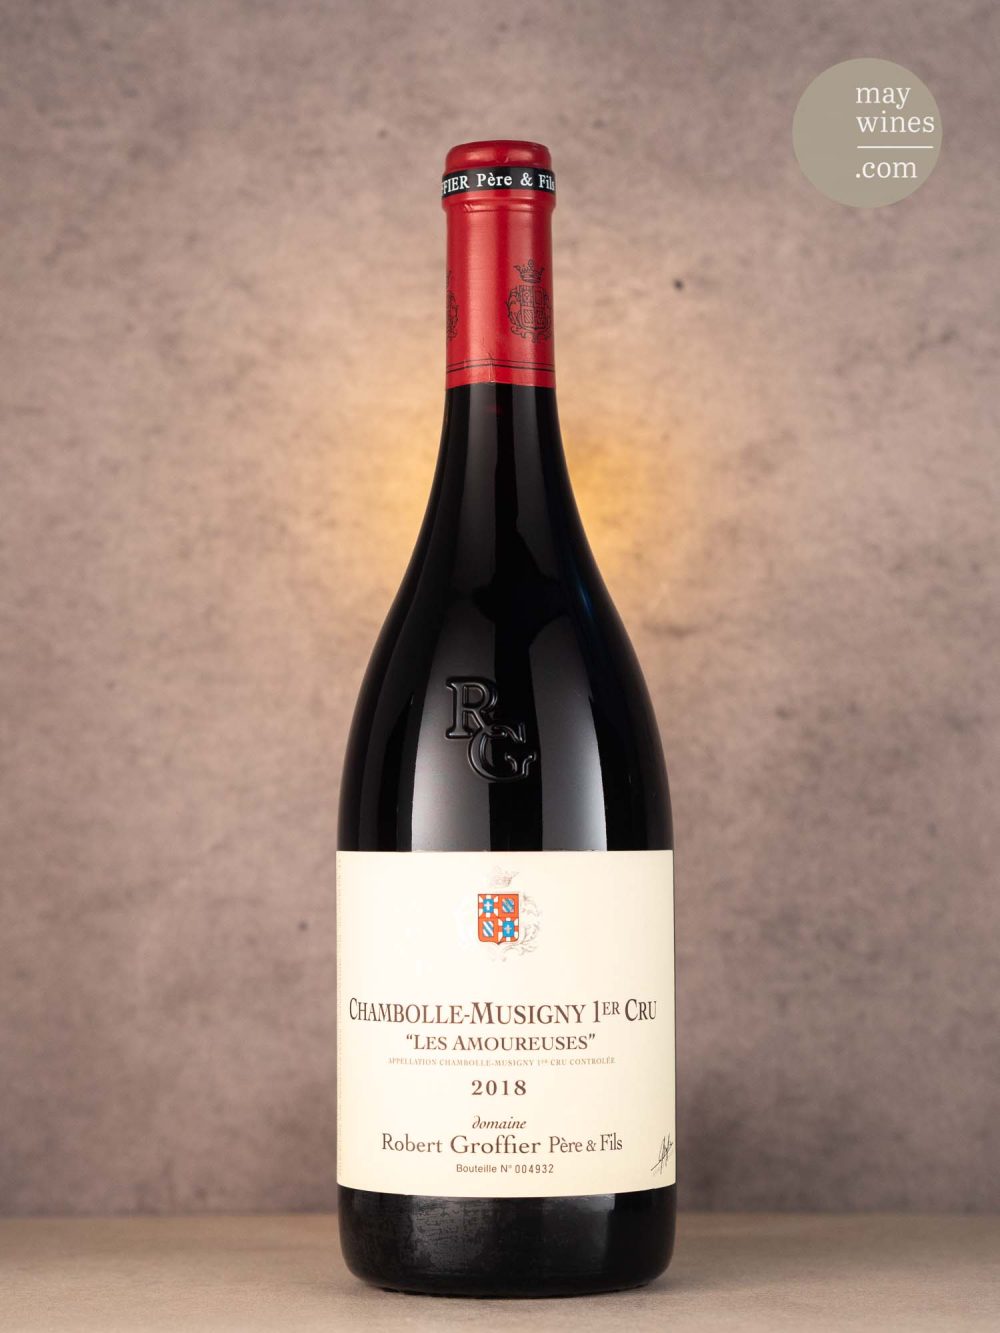 May Wines – Rotwein – 2018 Chambolle-Musigny Les Amoureuses Premier Cru - Domaine Robert Groffier Père & Fils